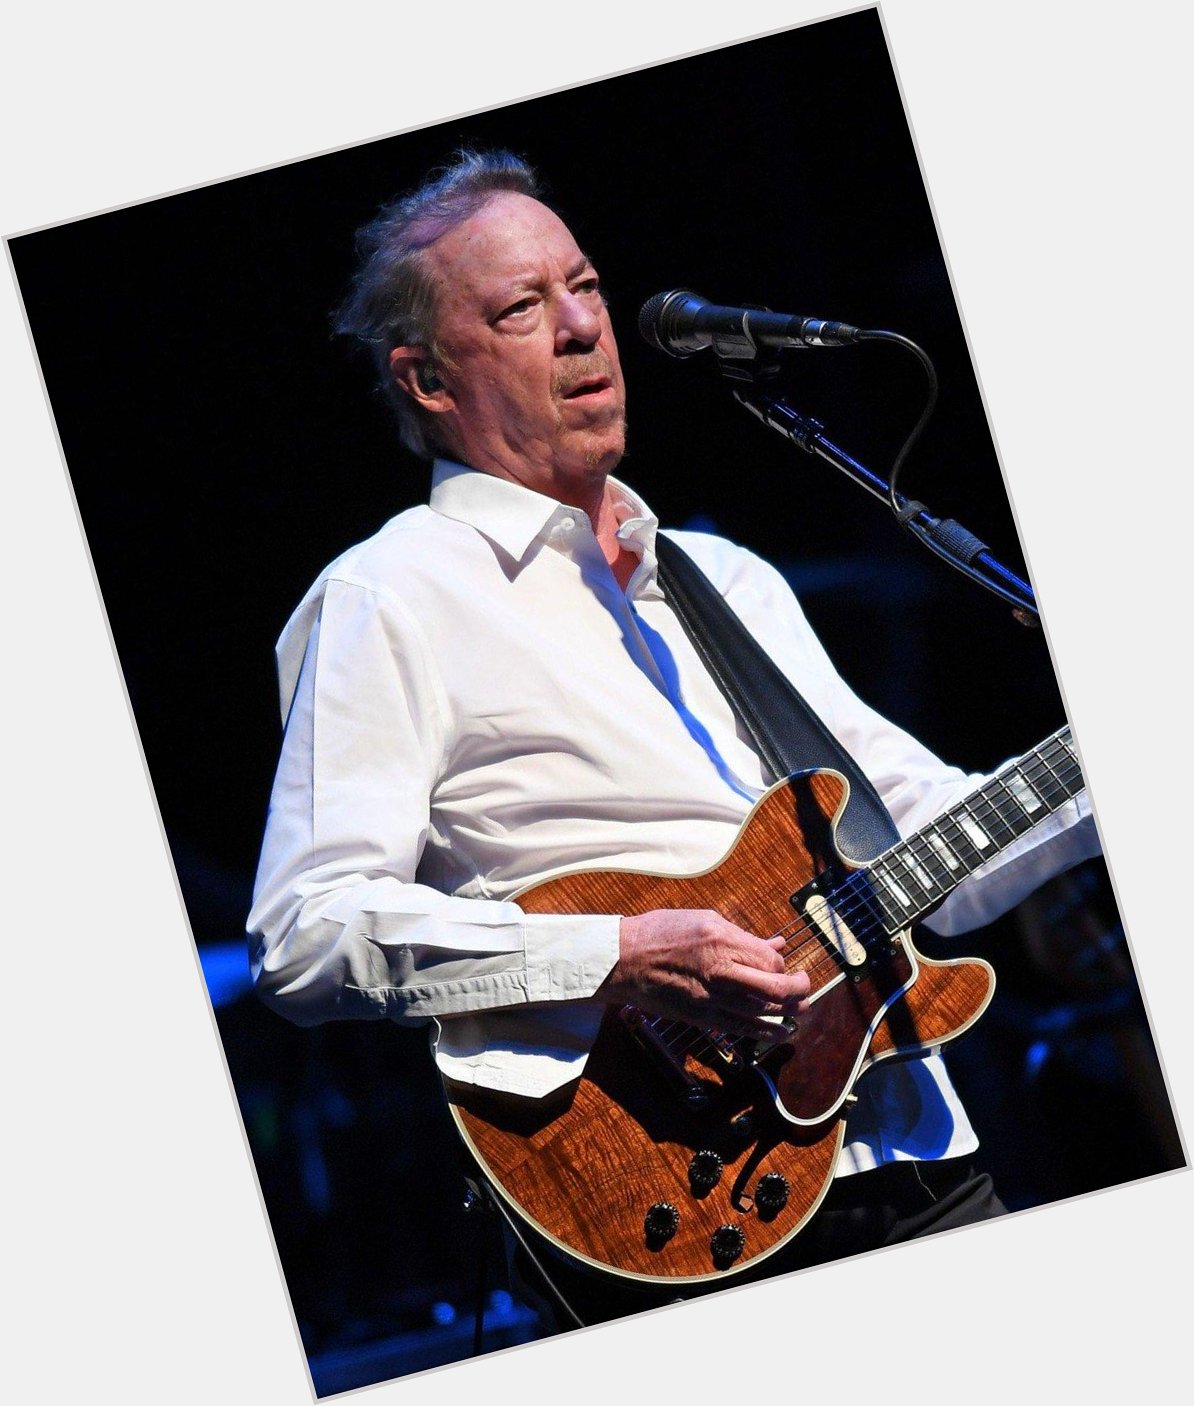 Happy Birthday to an incredible musician Boz Scaggs!   He was born on June 8, 1944 (age 75 years) 